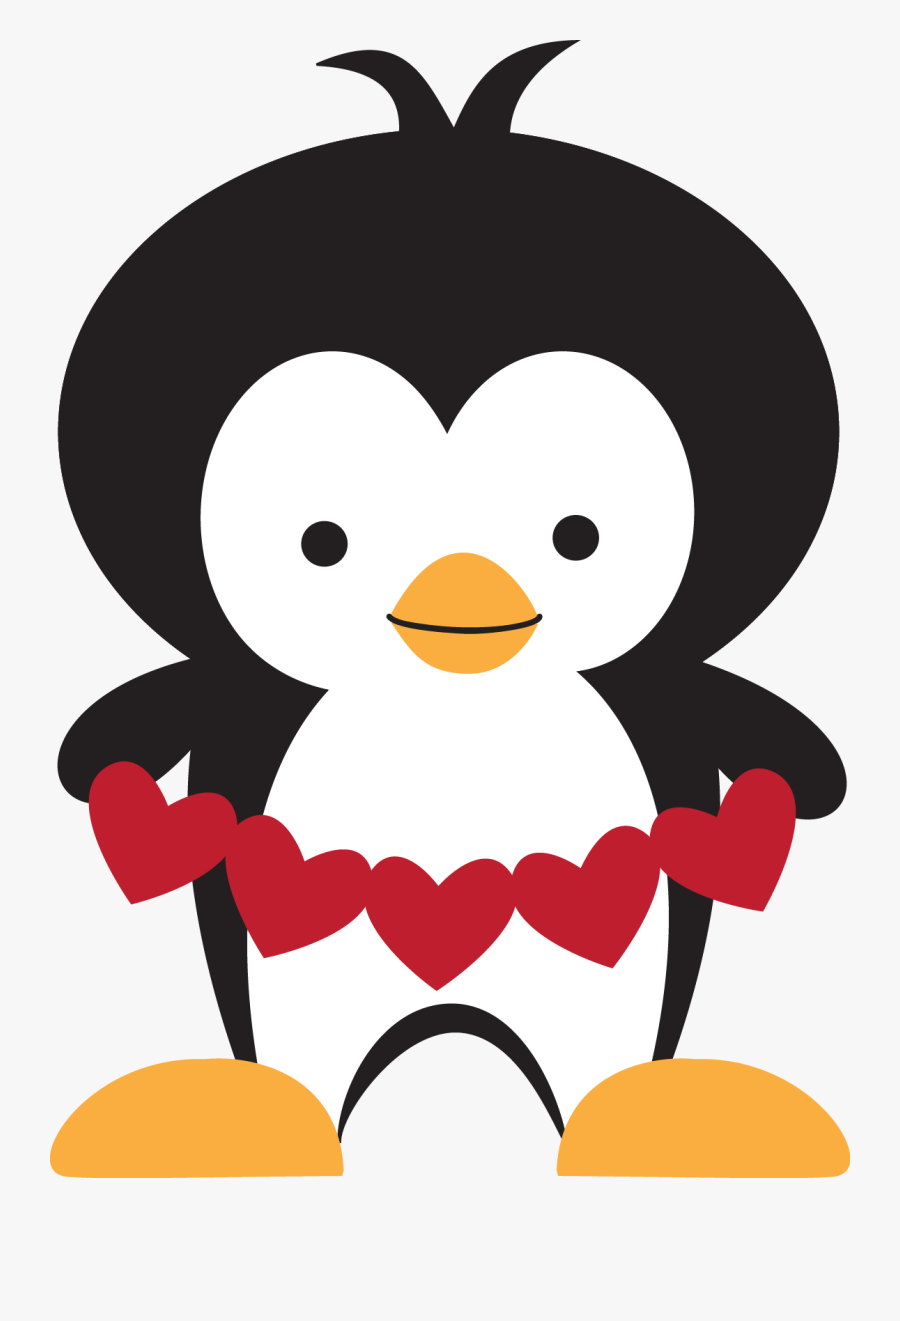 Antarctica Clipart At Getdrawings - Penguin With Heart Clipart, Transparent Clipart